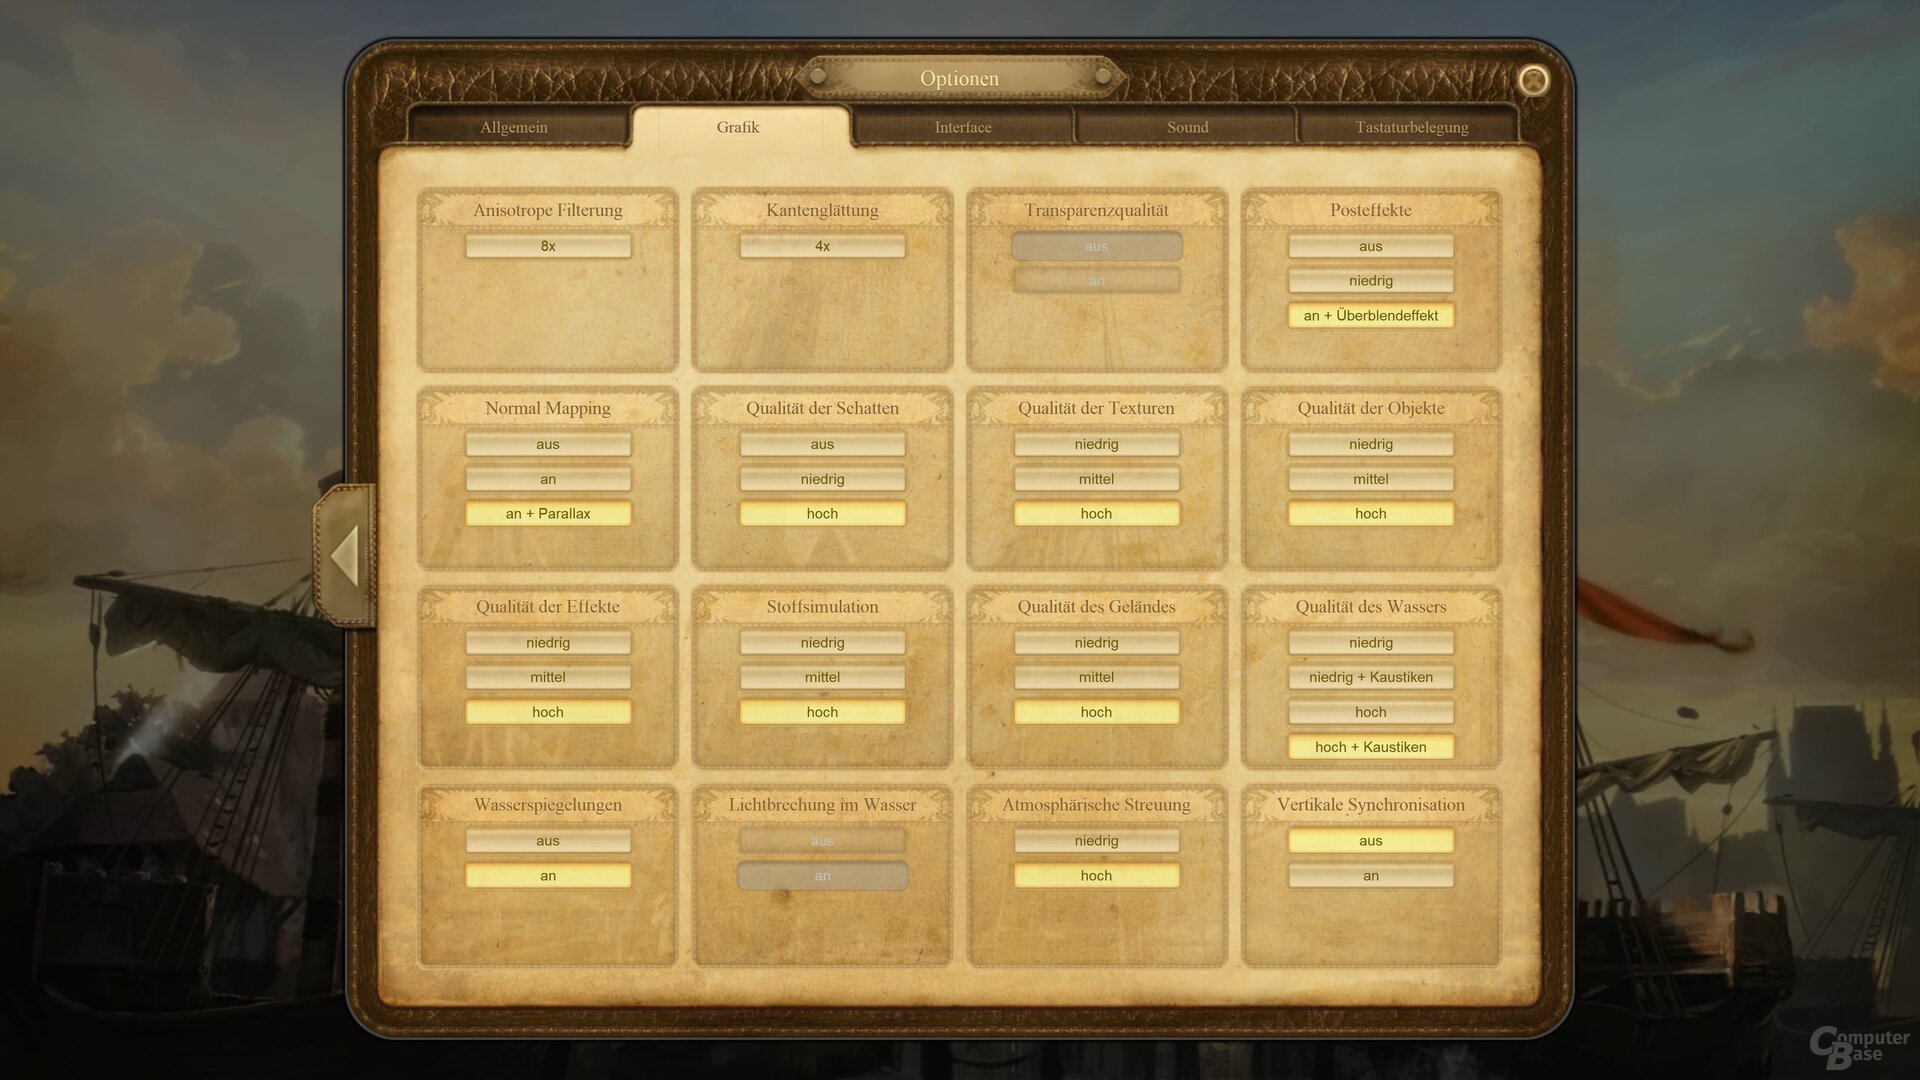 The graphics menu of the Anno 1404 History Collection